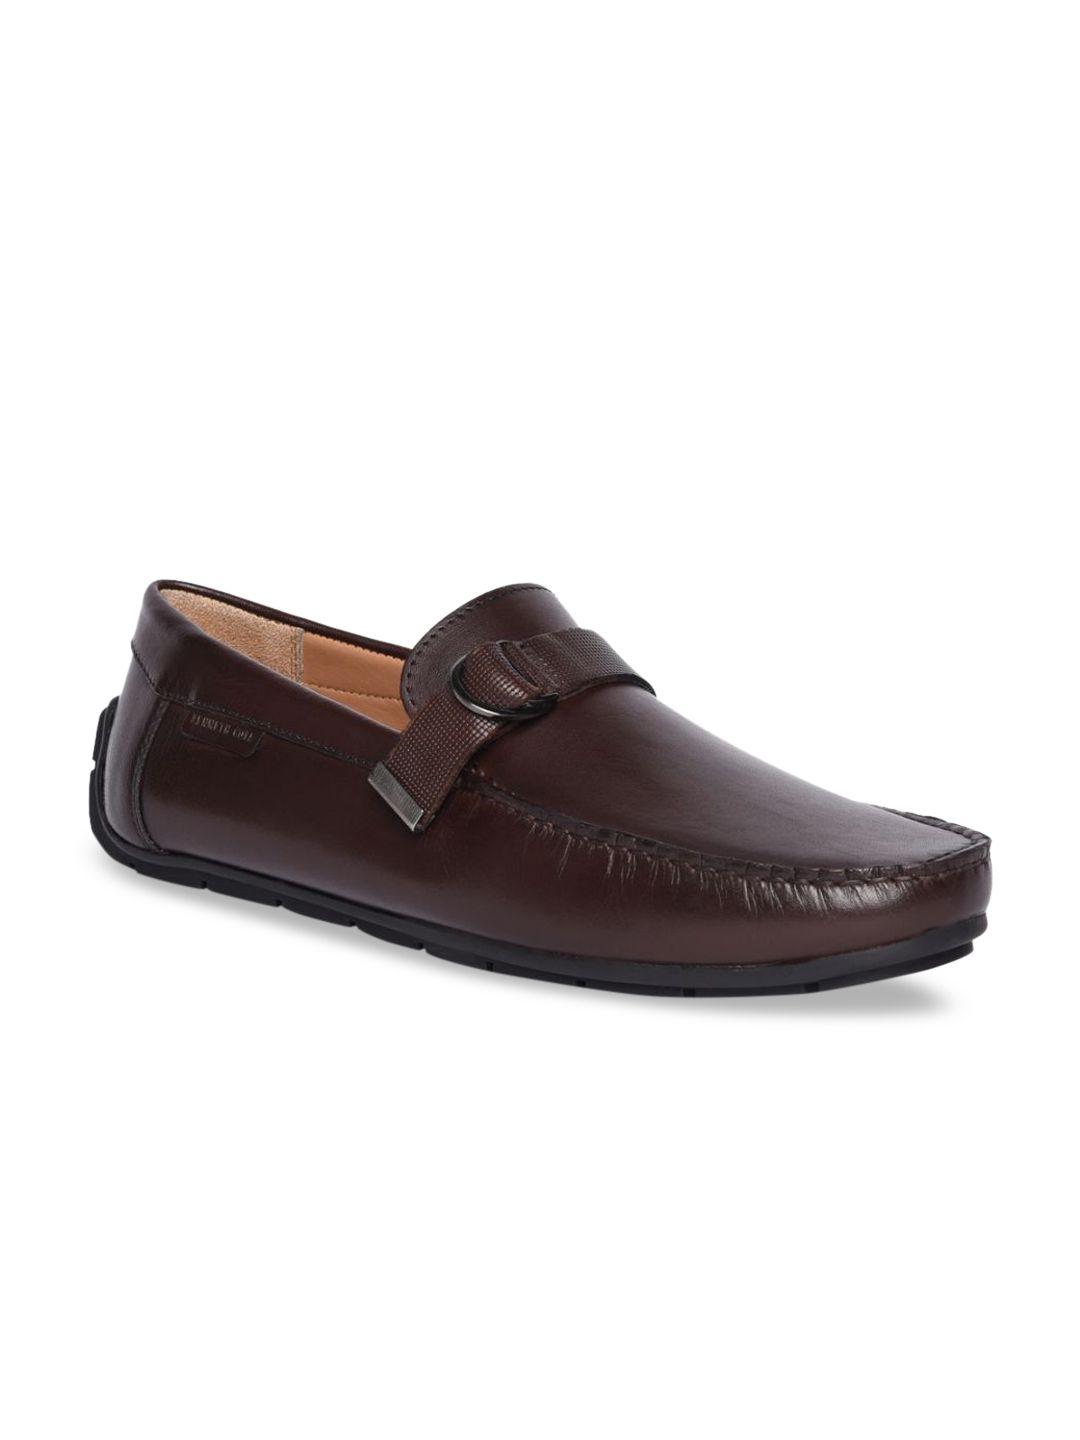 kenneth-cole-men-brown-leather-penny-loafers